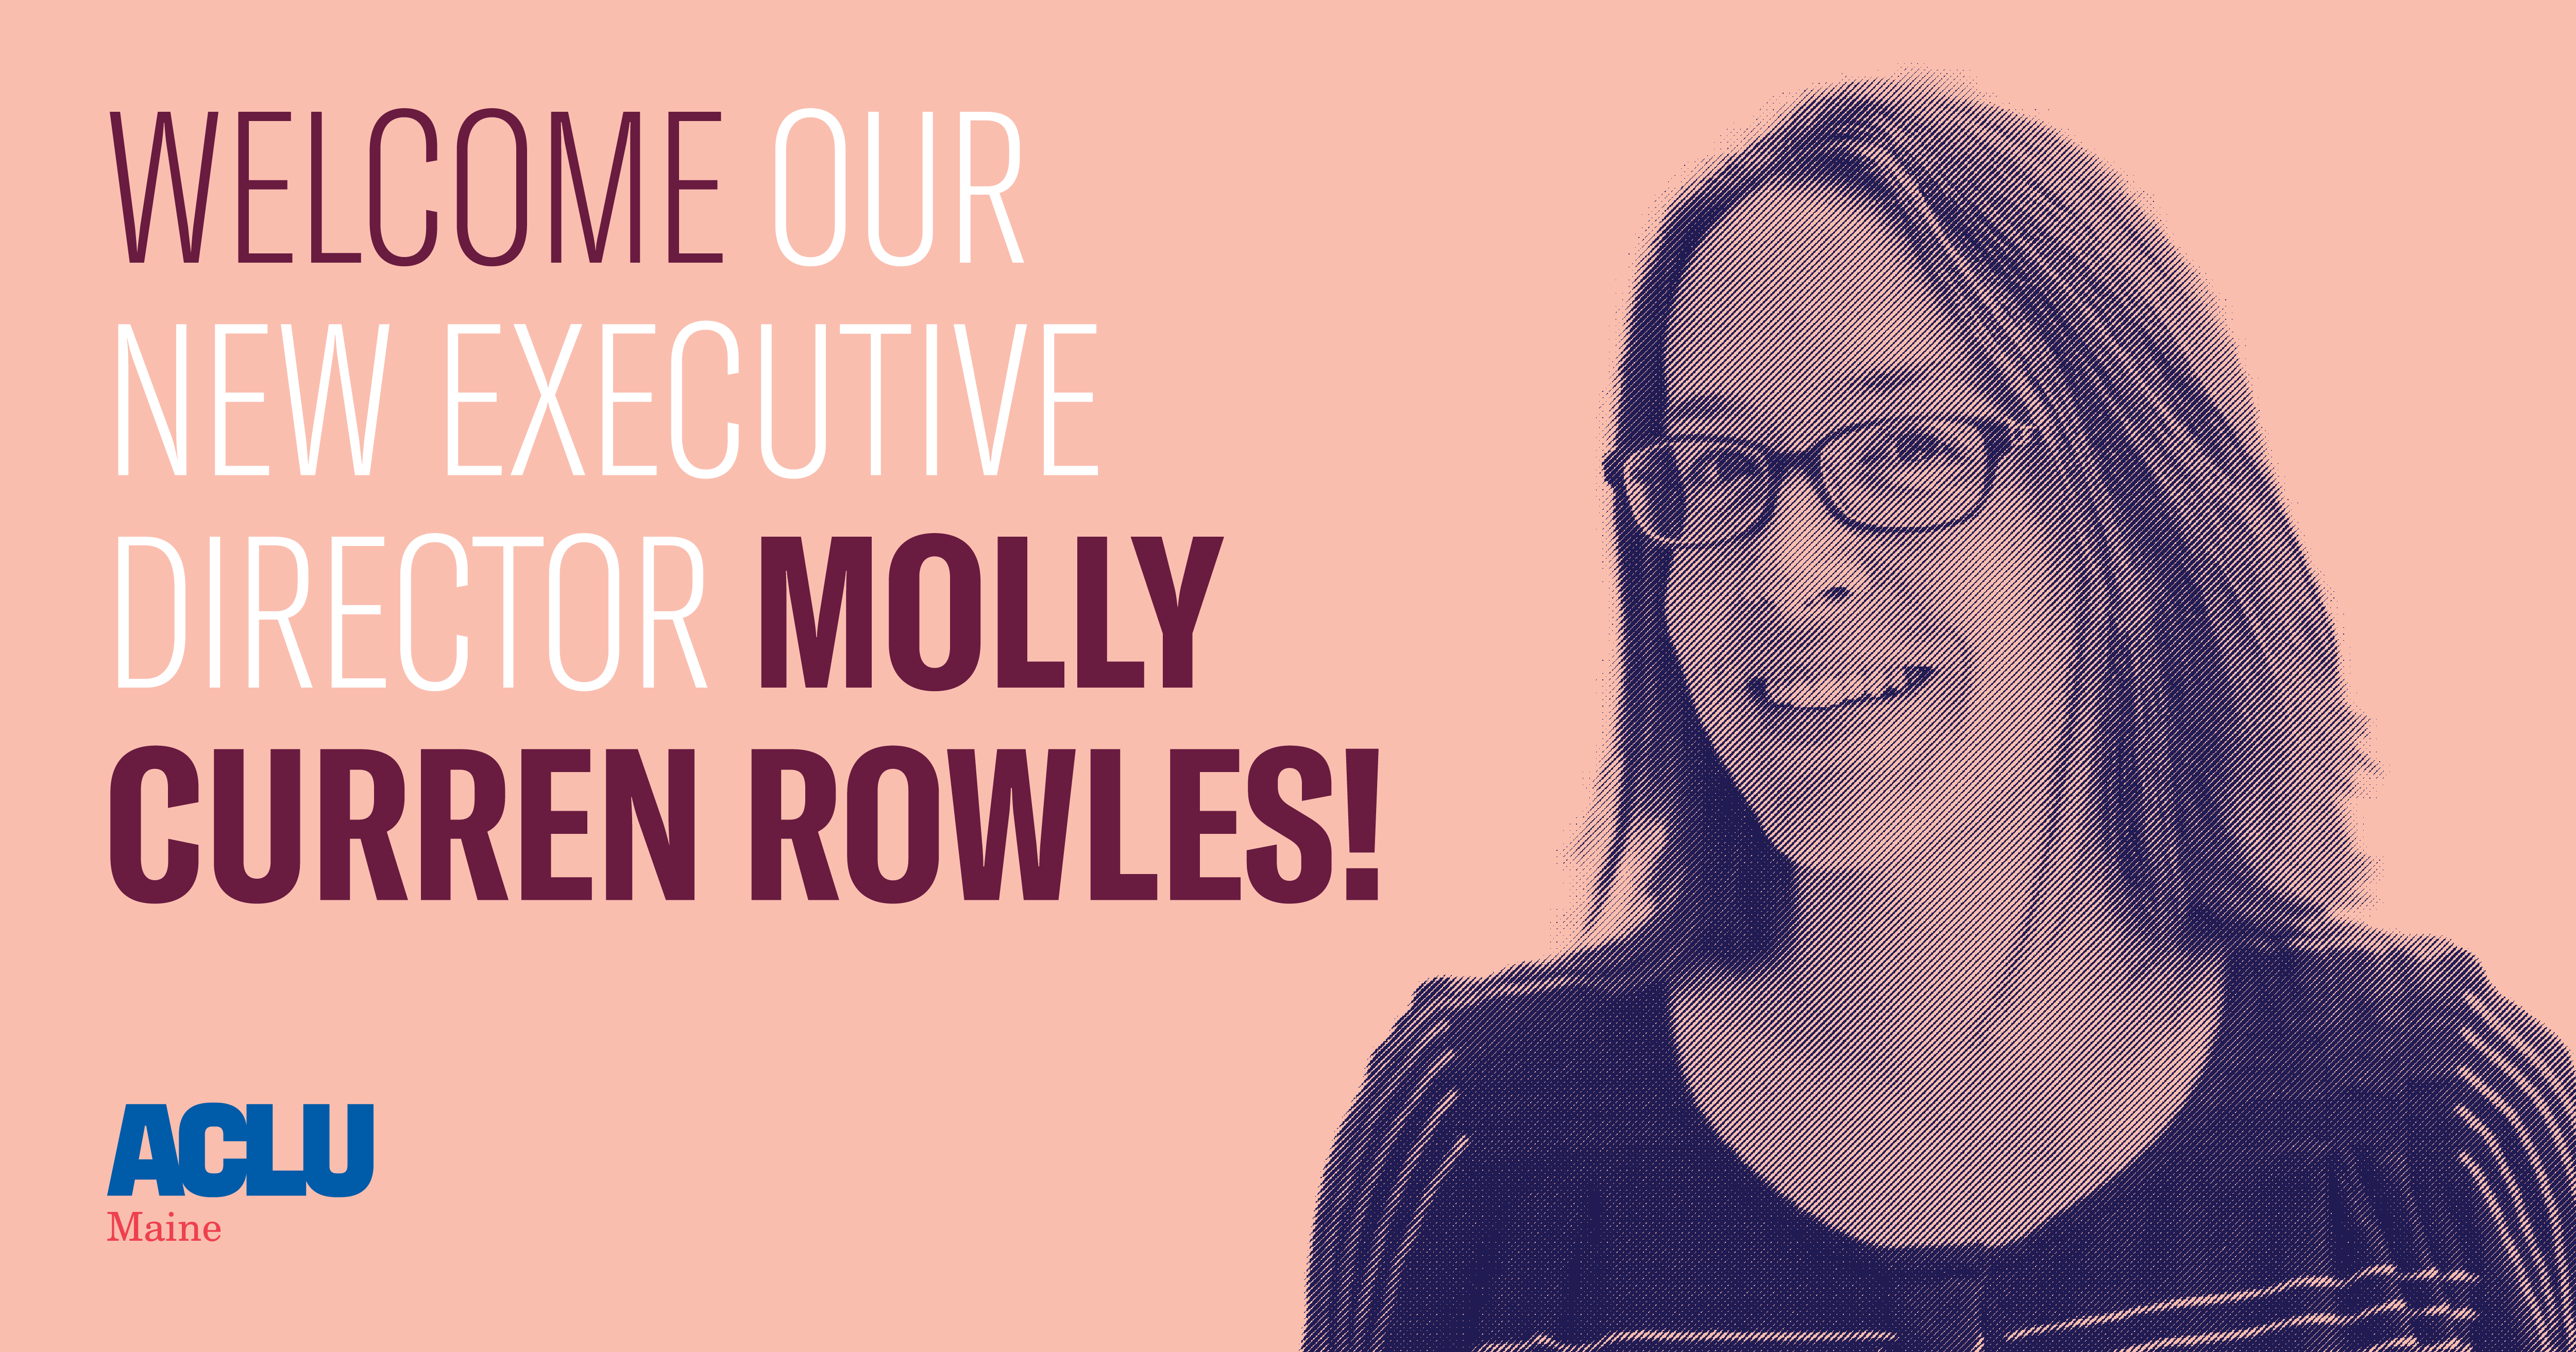 Welcome our next executive director Molly Curren Rowles!